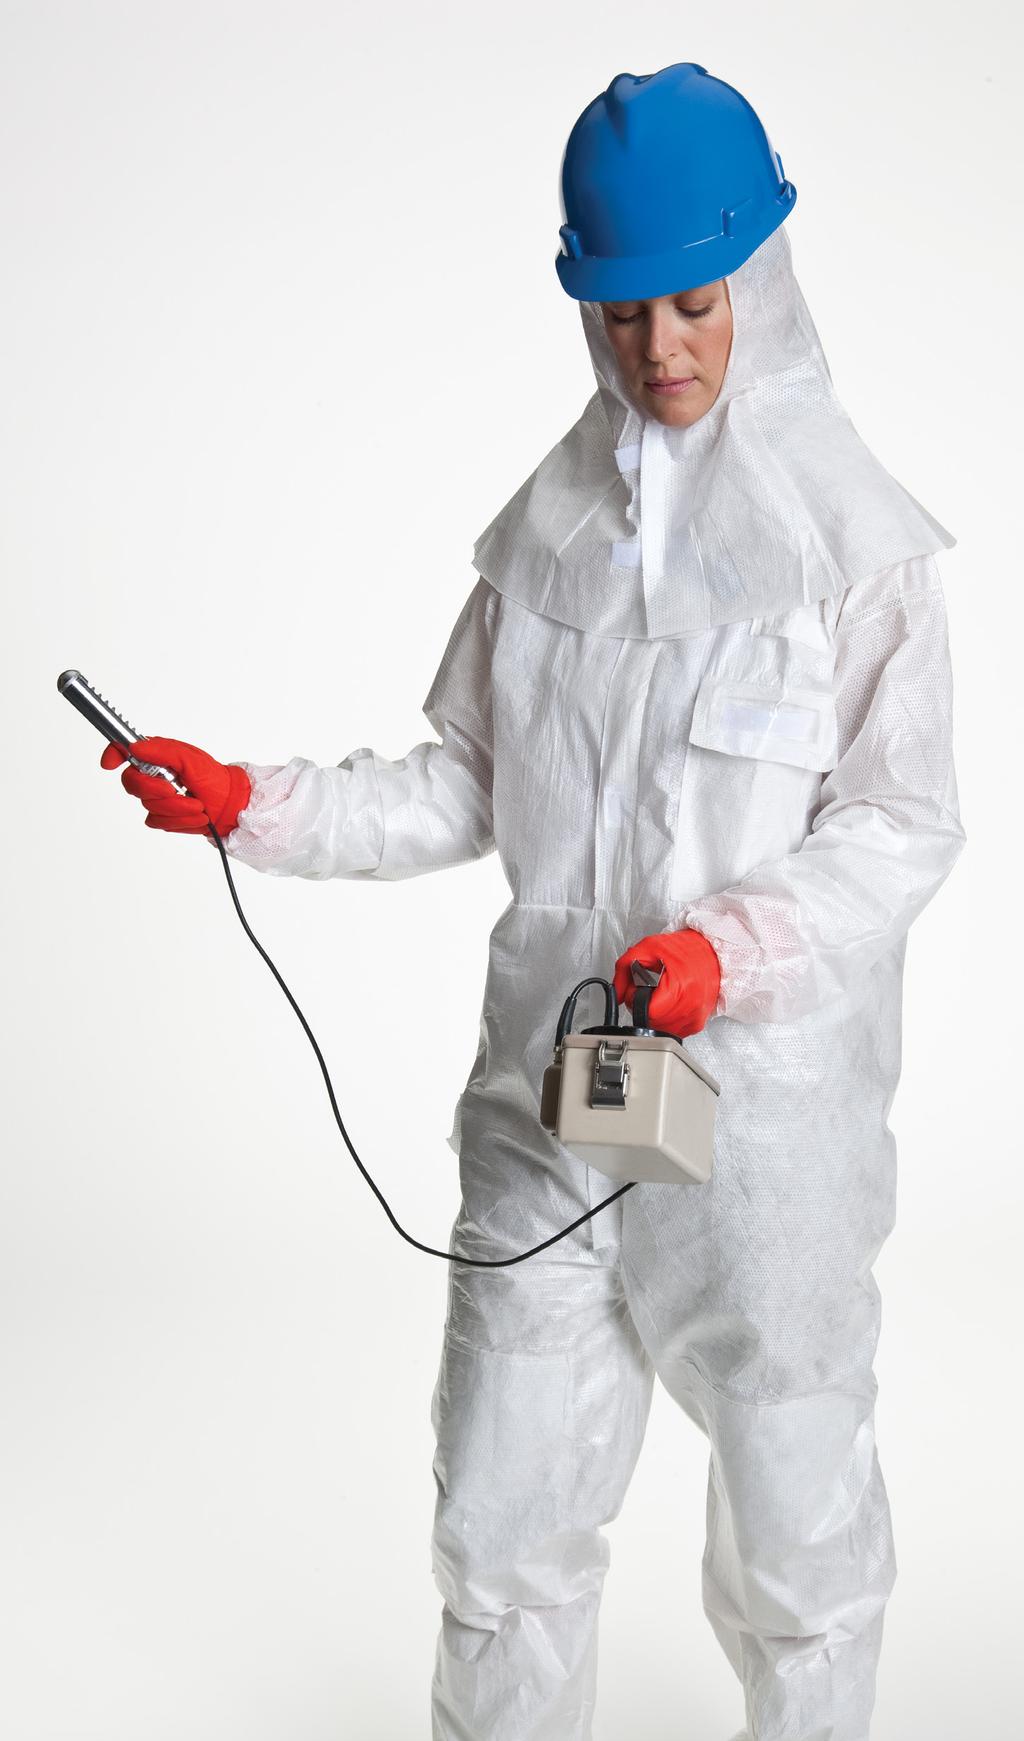 OREX Protective Clothing Application Guide OREX protective clothing products have proven to be highly effective in a wide variety of nuclear and industrial applications.